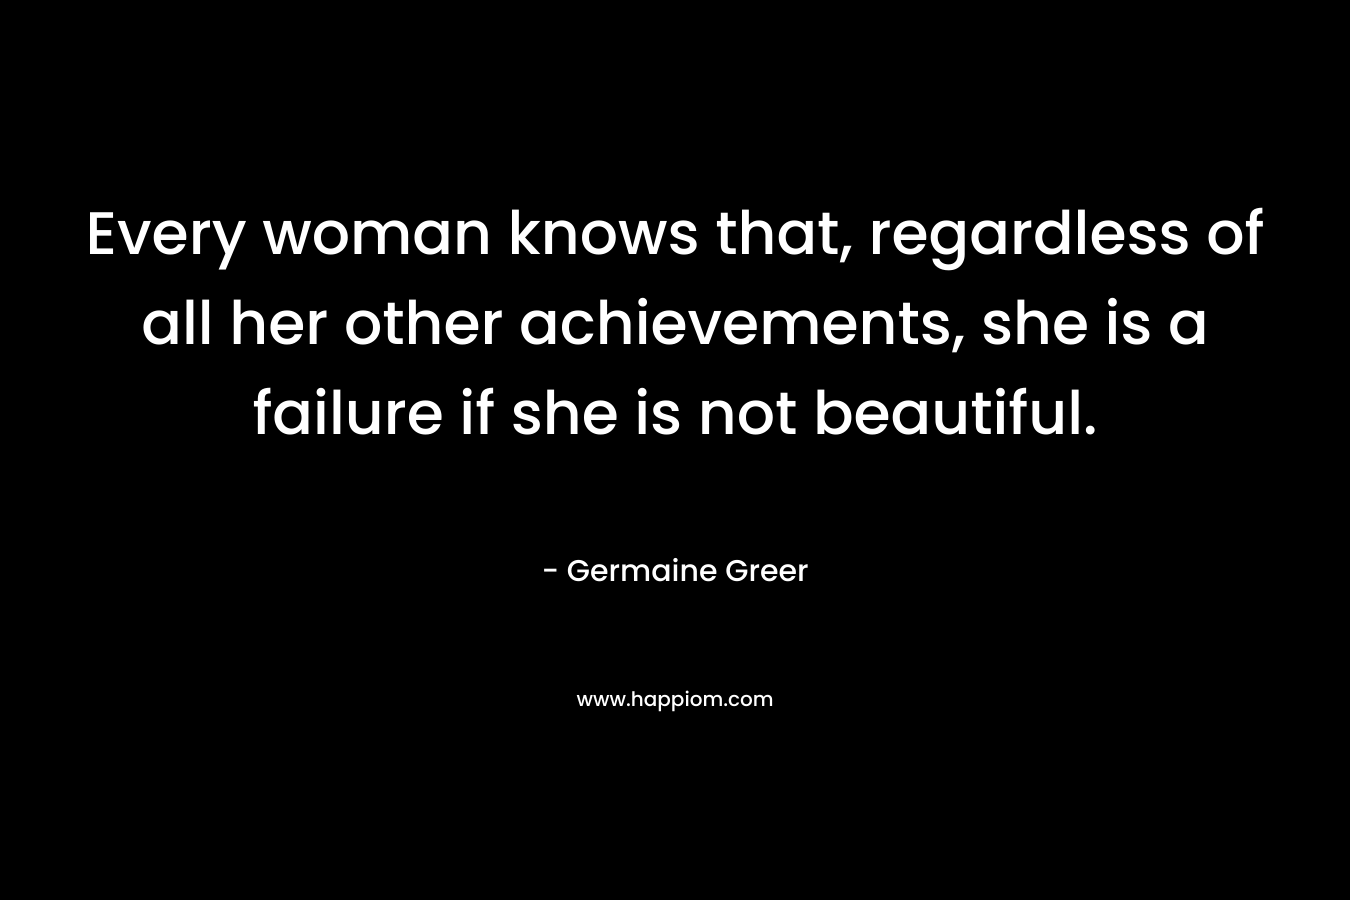 Every woman knows that, regardless of all her other achievements, she is a failure if she is not beautiful.